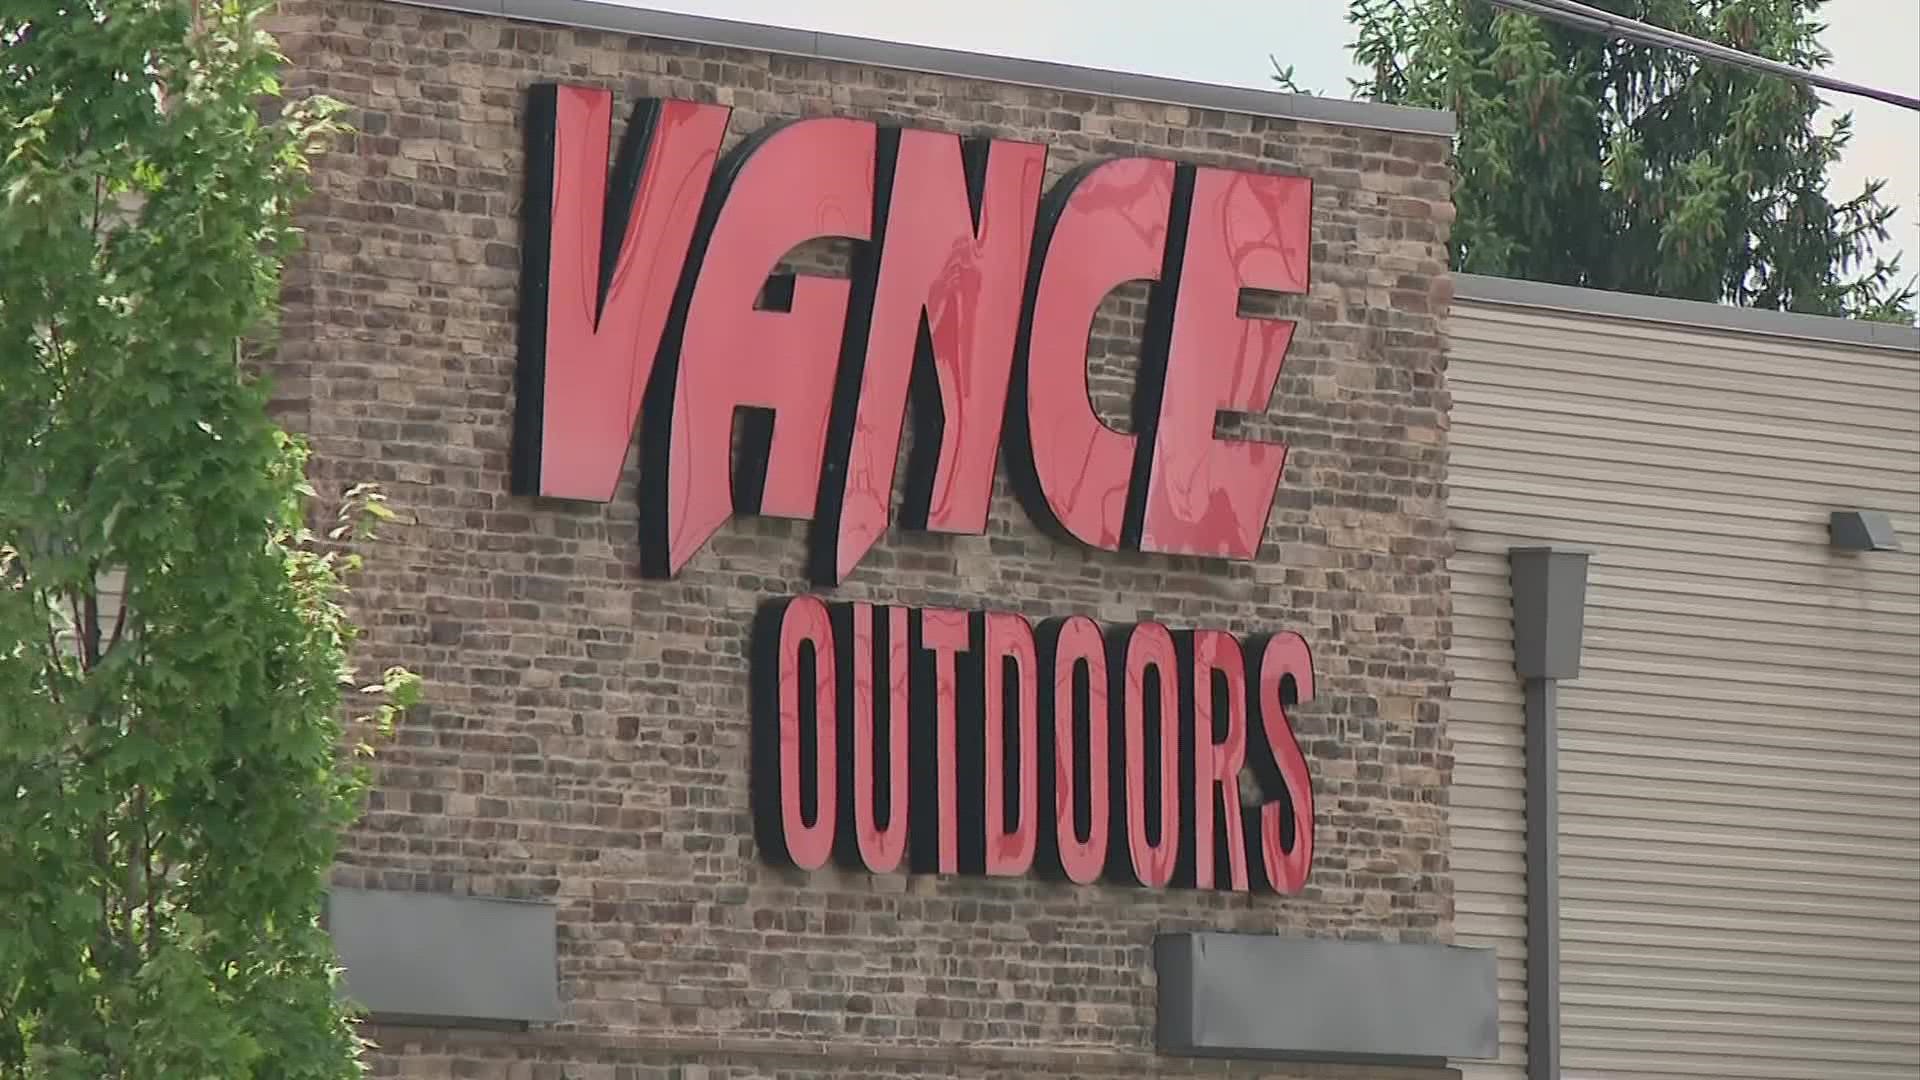 According to an Obetz police report, it was around 4:30 in the morning last Monday when police were called after cars rammed a back door at Vance Outdoors.